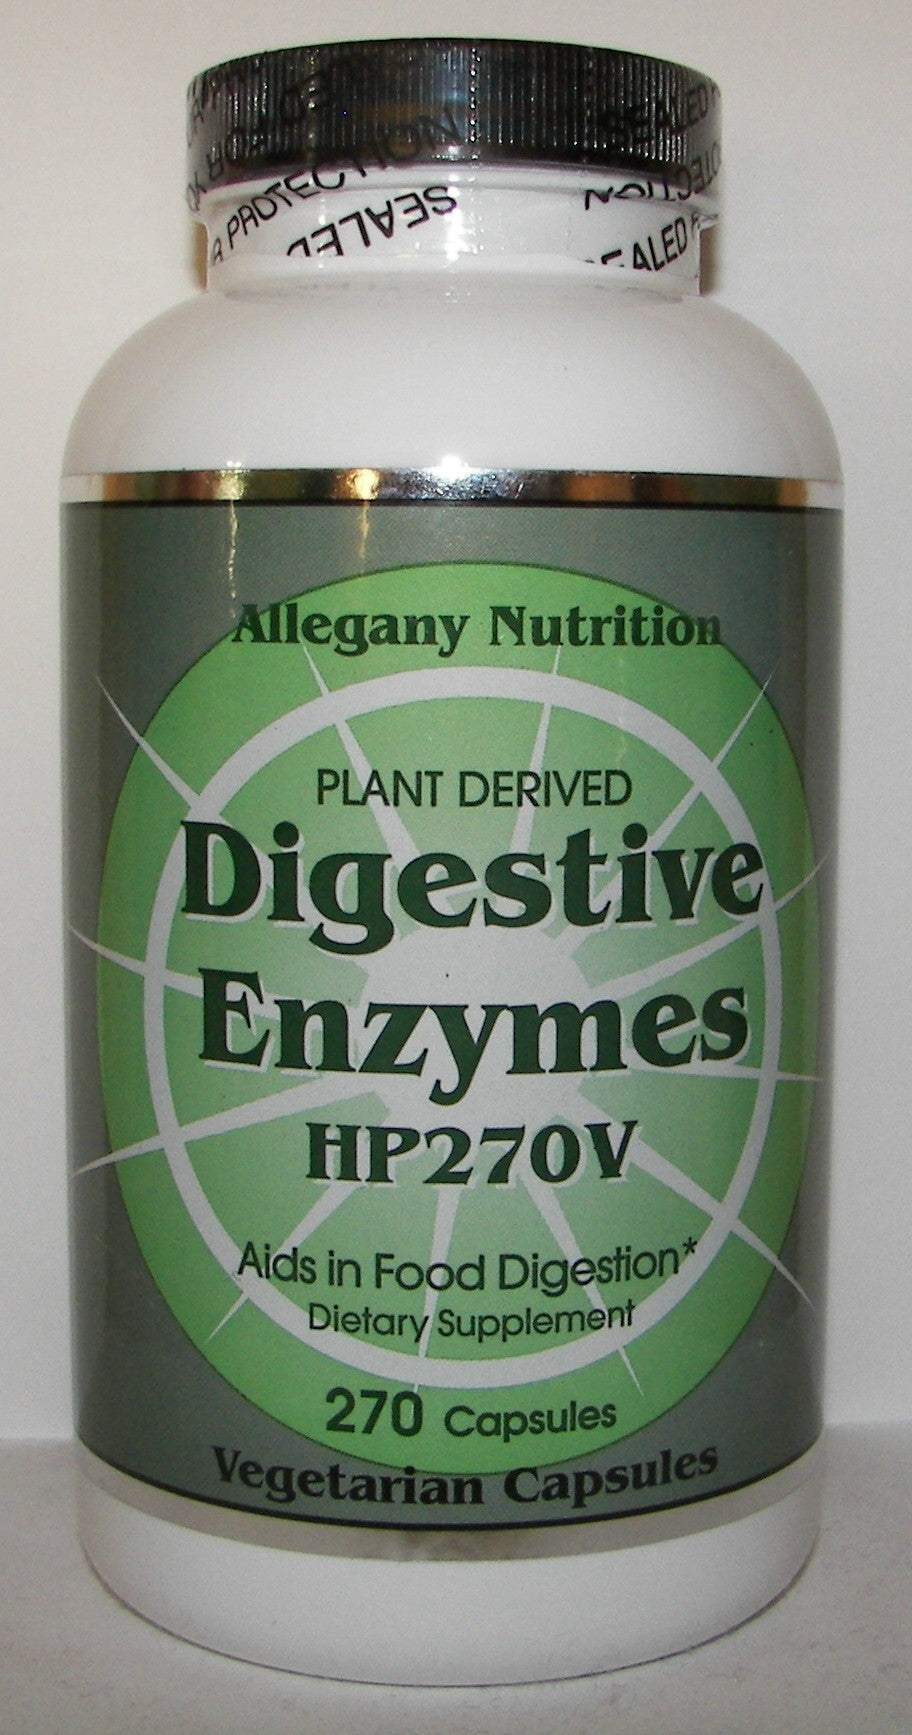 Allegany Nutrition Digestive Enzymes HP270V